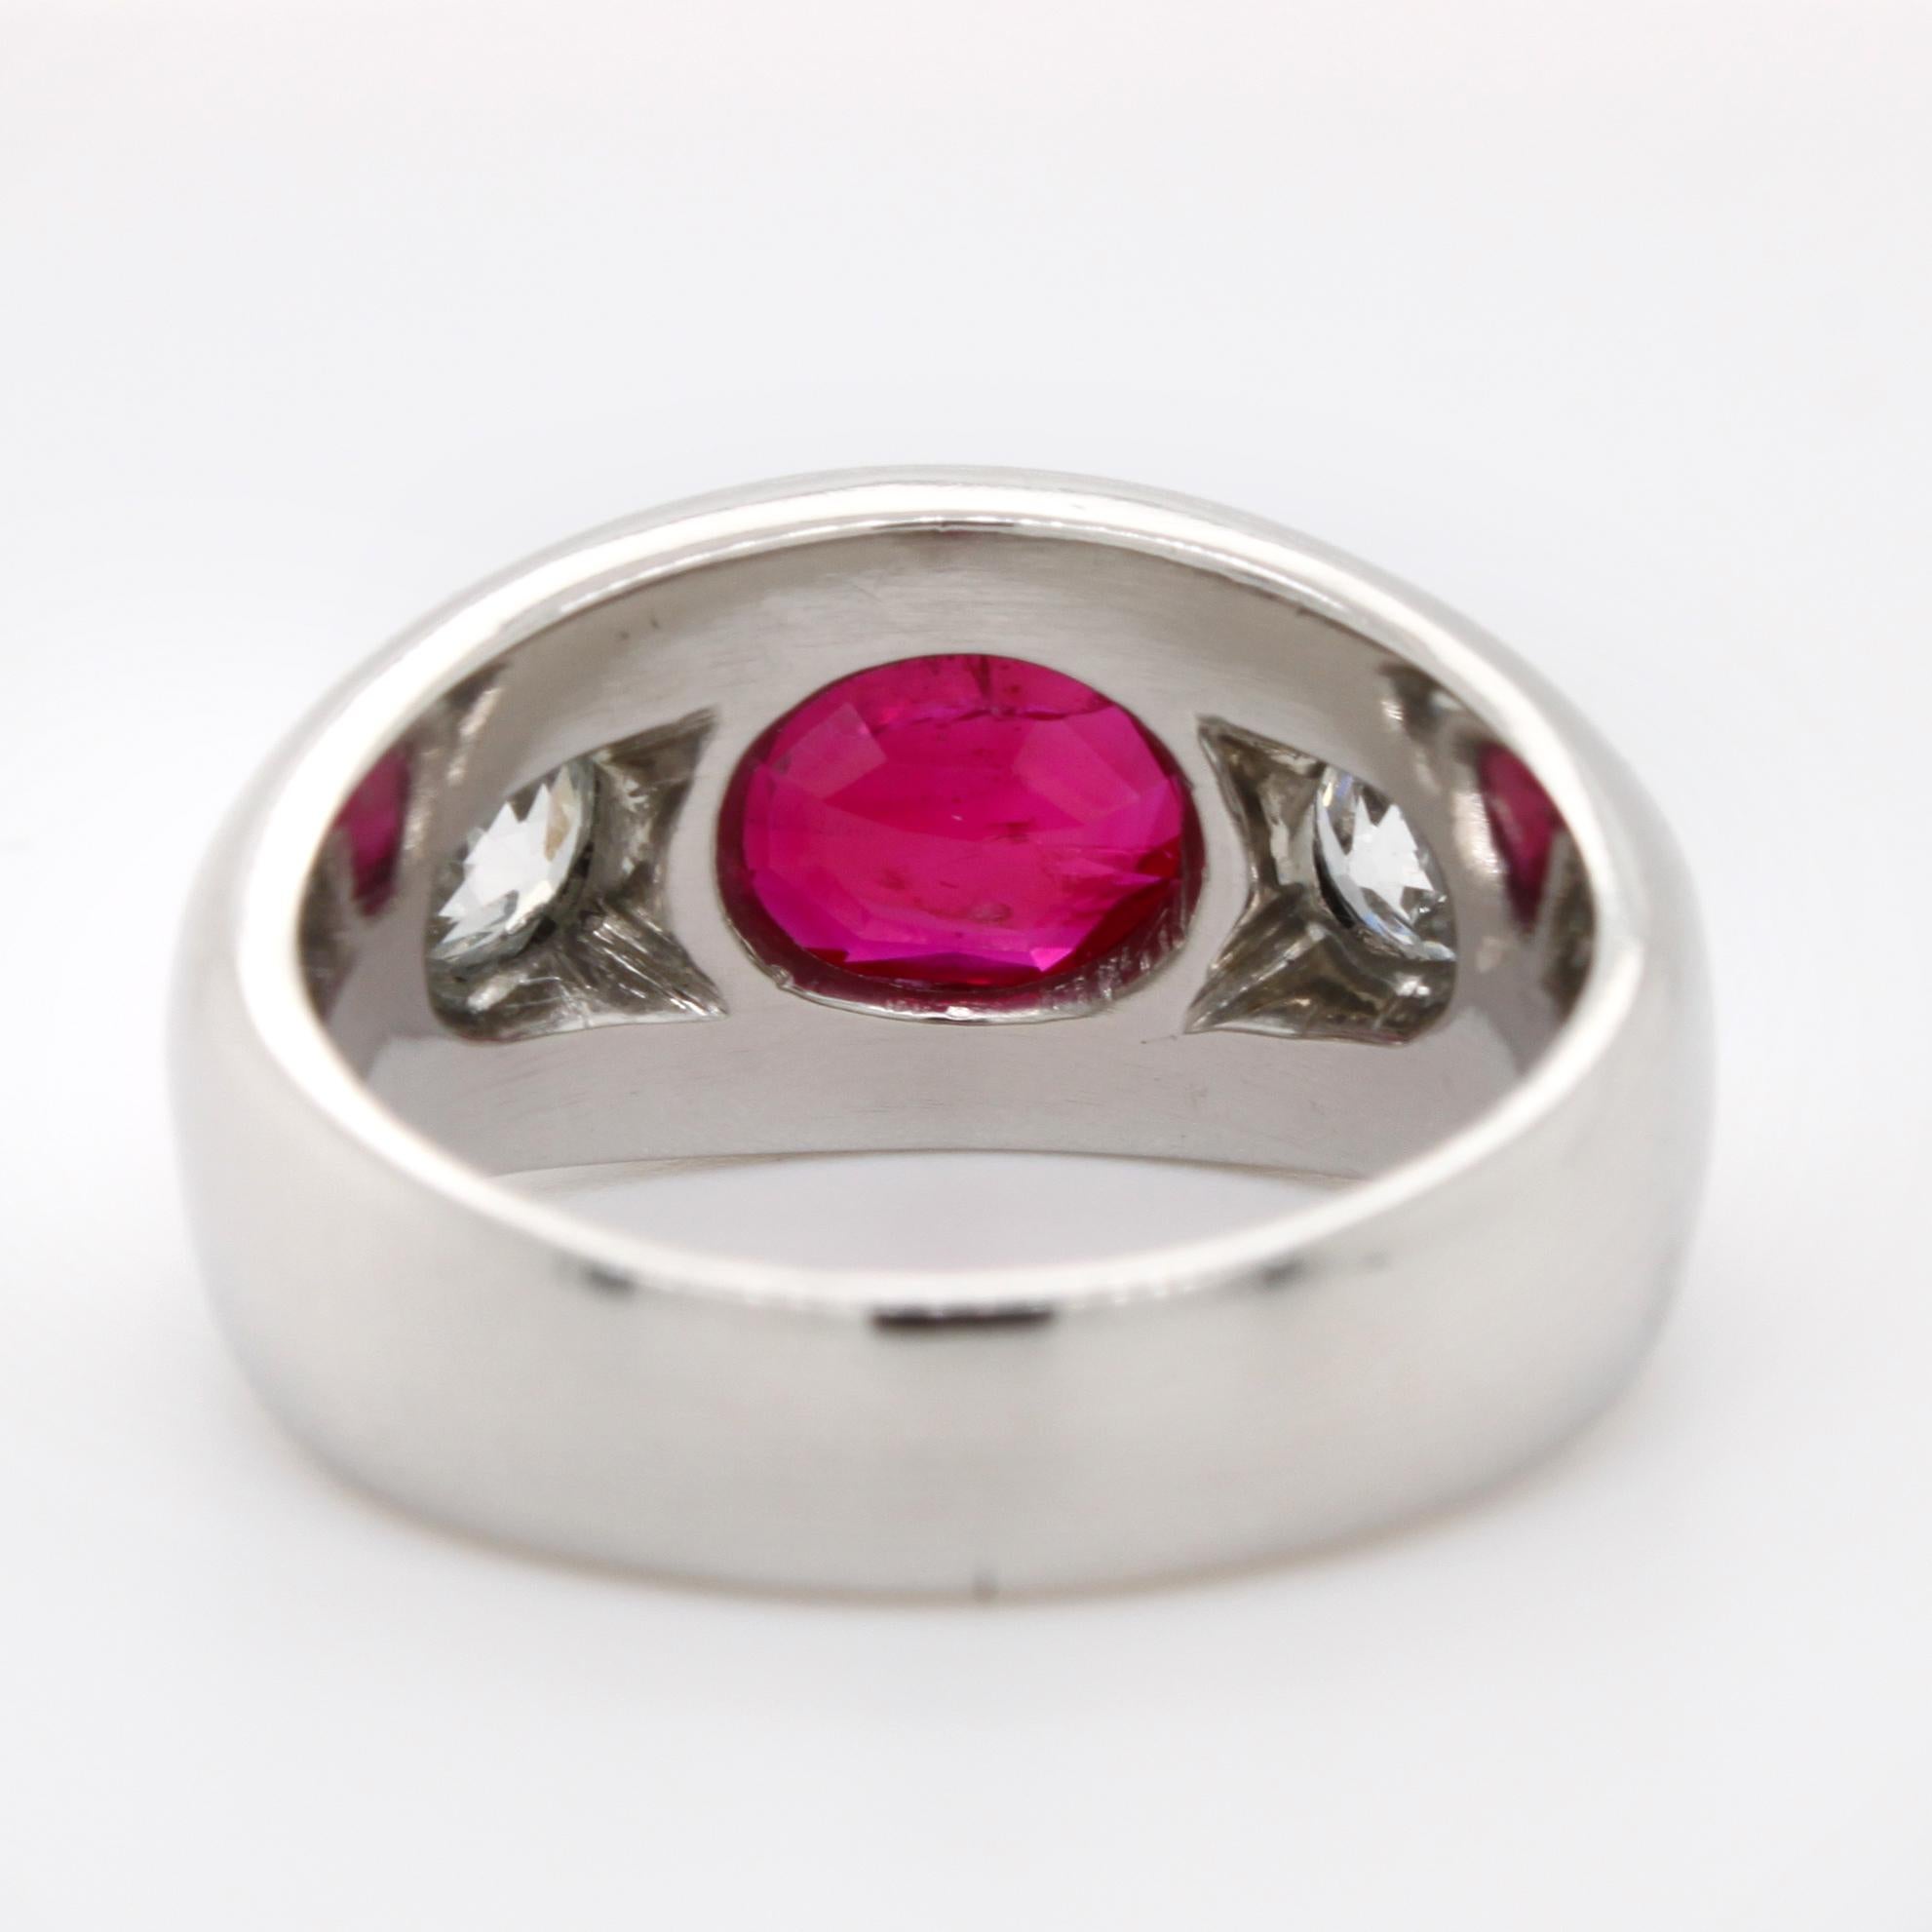 A natural Burma ruby and two round old European cut diamond ring in white gold. The ruby weighs 1,66ct and is accompanied by a German gemological certificate stating that the ruby is from Burma, natural and not heat treated. The diamonds weigh circa